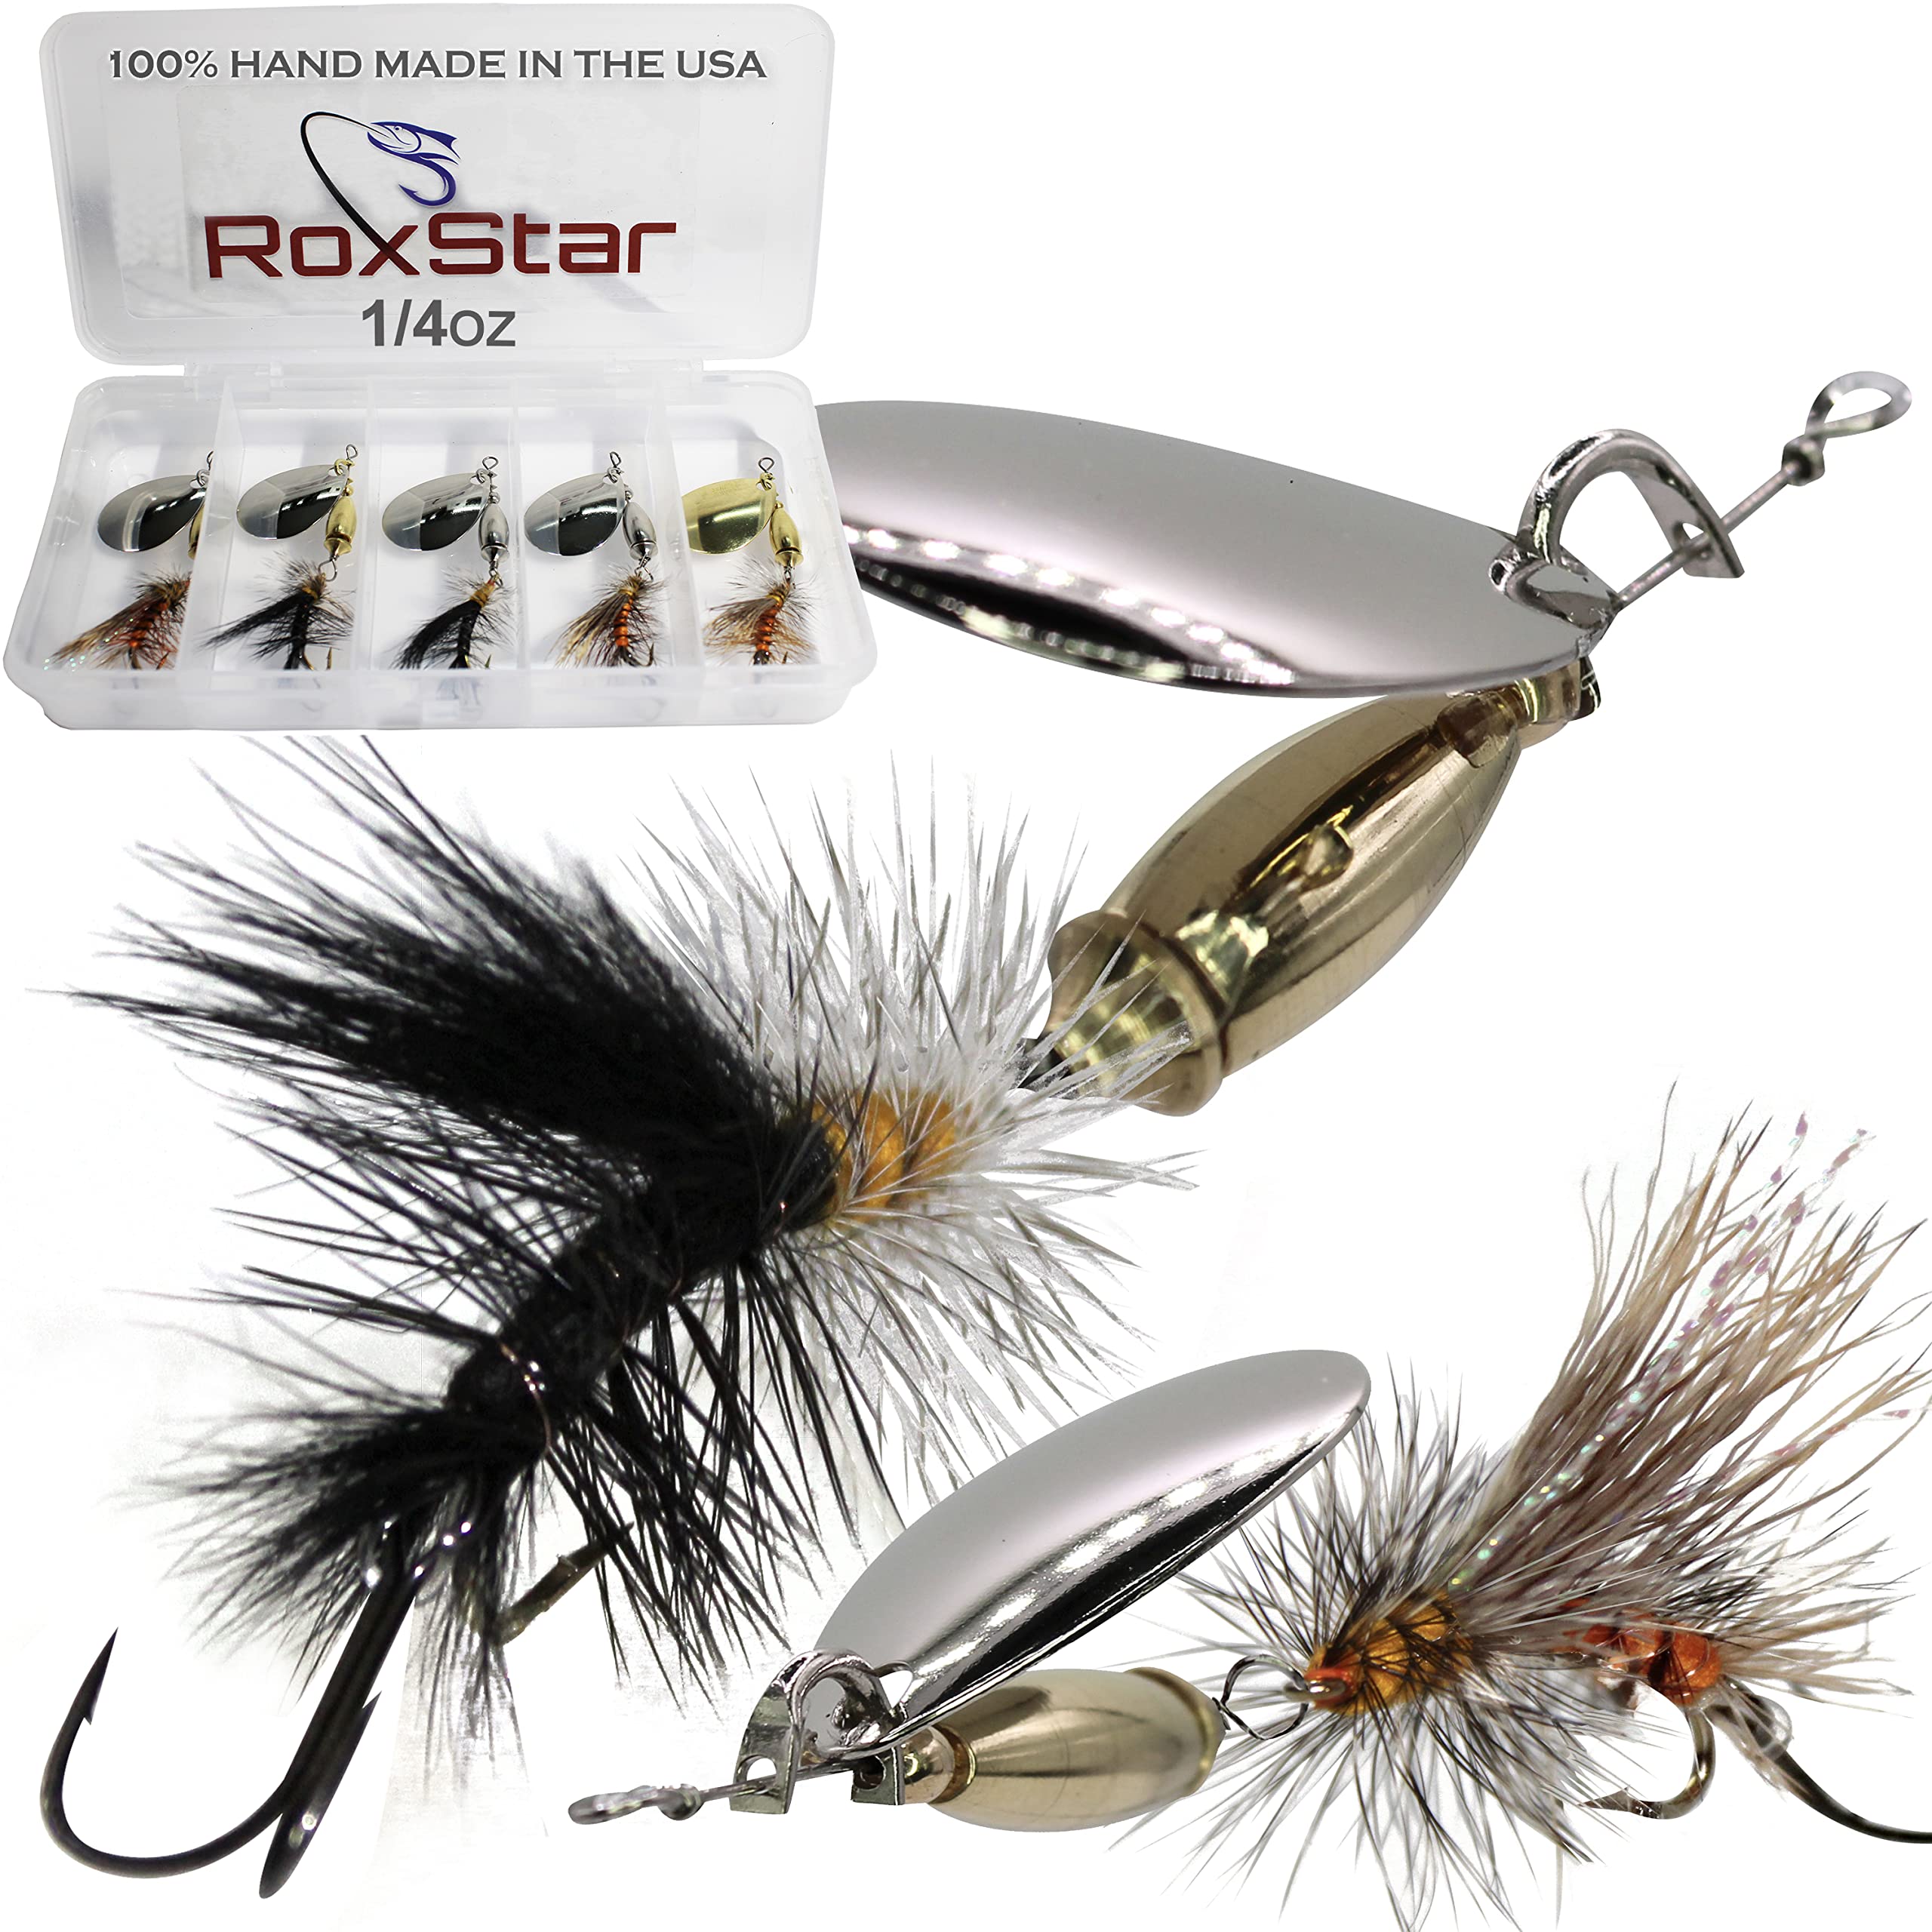 RoxStar Fly Strikers - Hand-Crafted in The USA - Proven Nationwide Most  Versatile Fishing Spinner for Bass